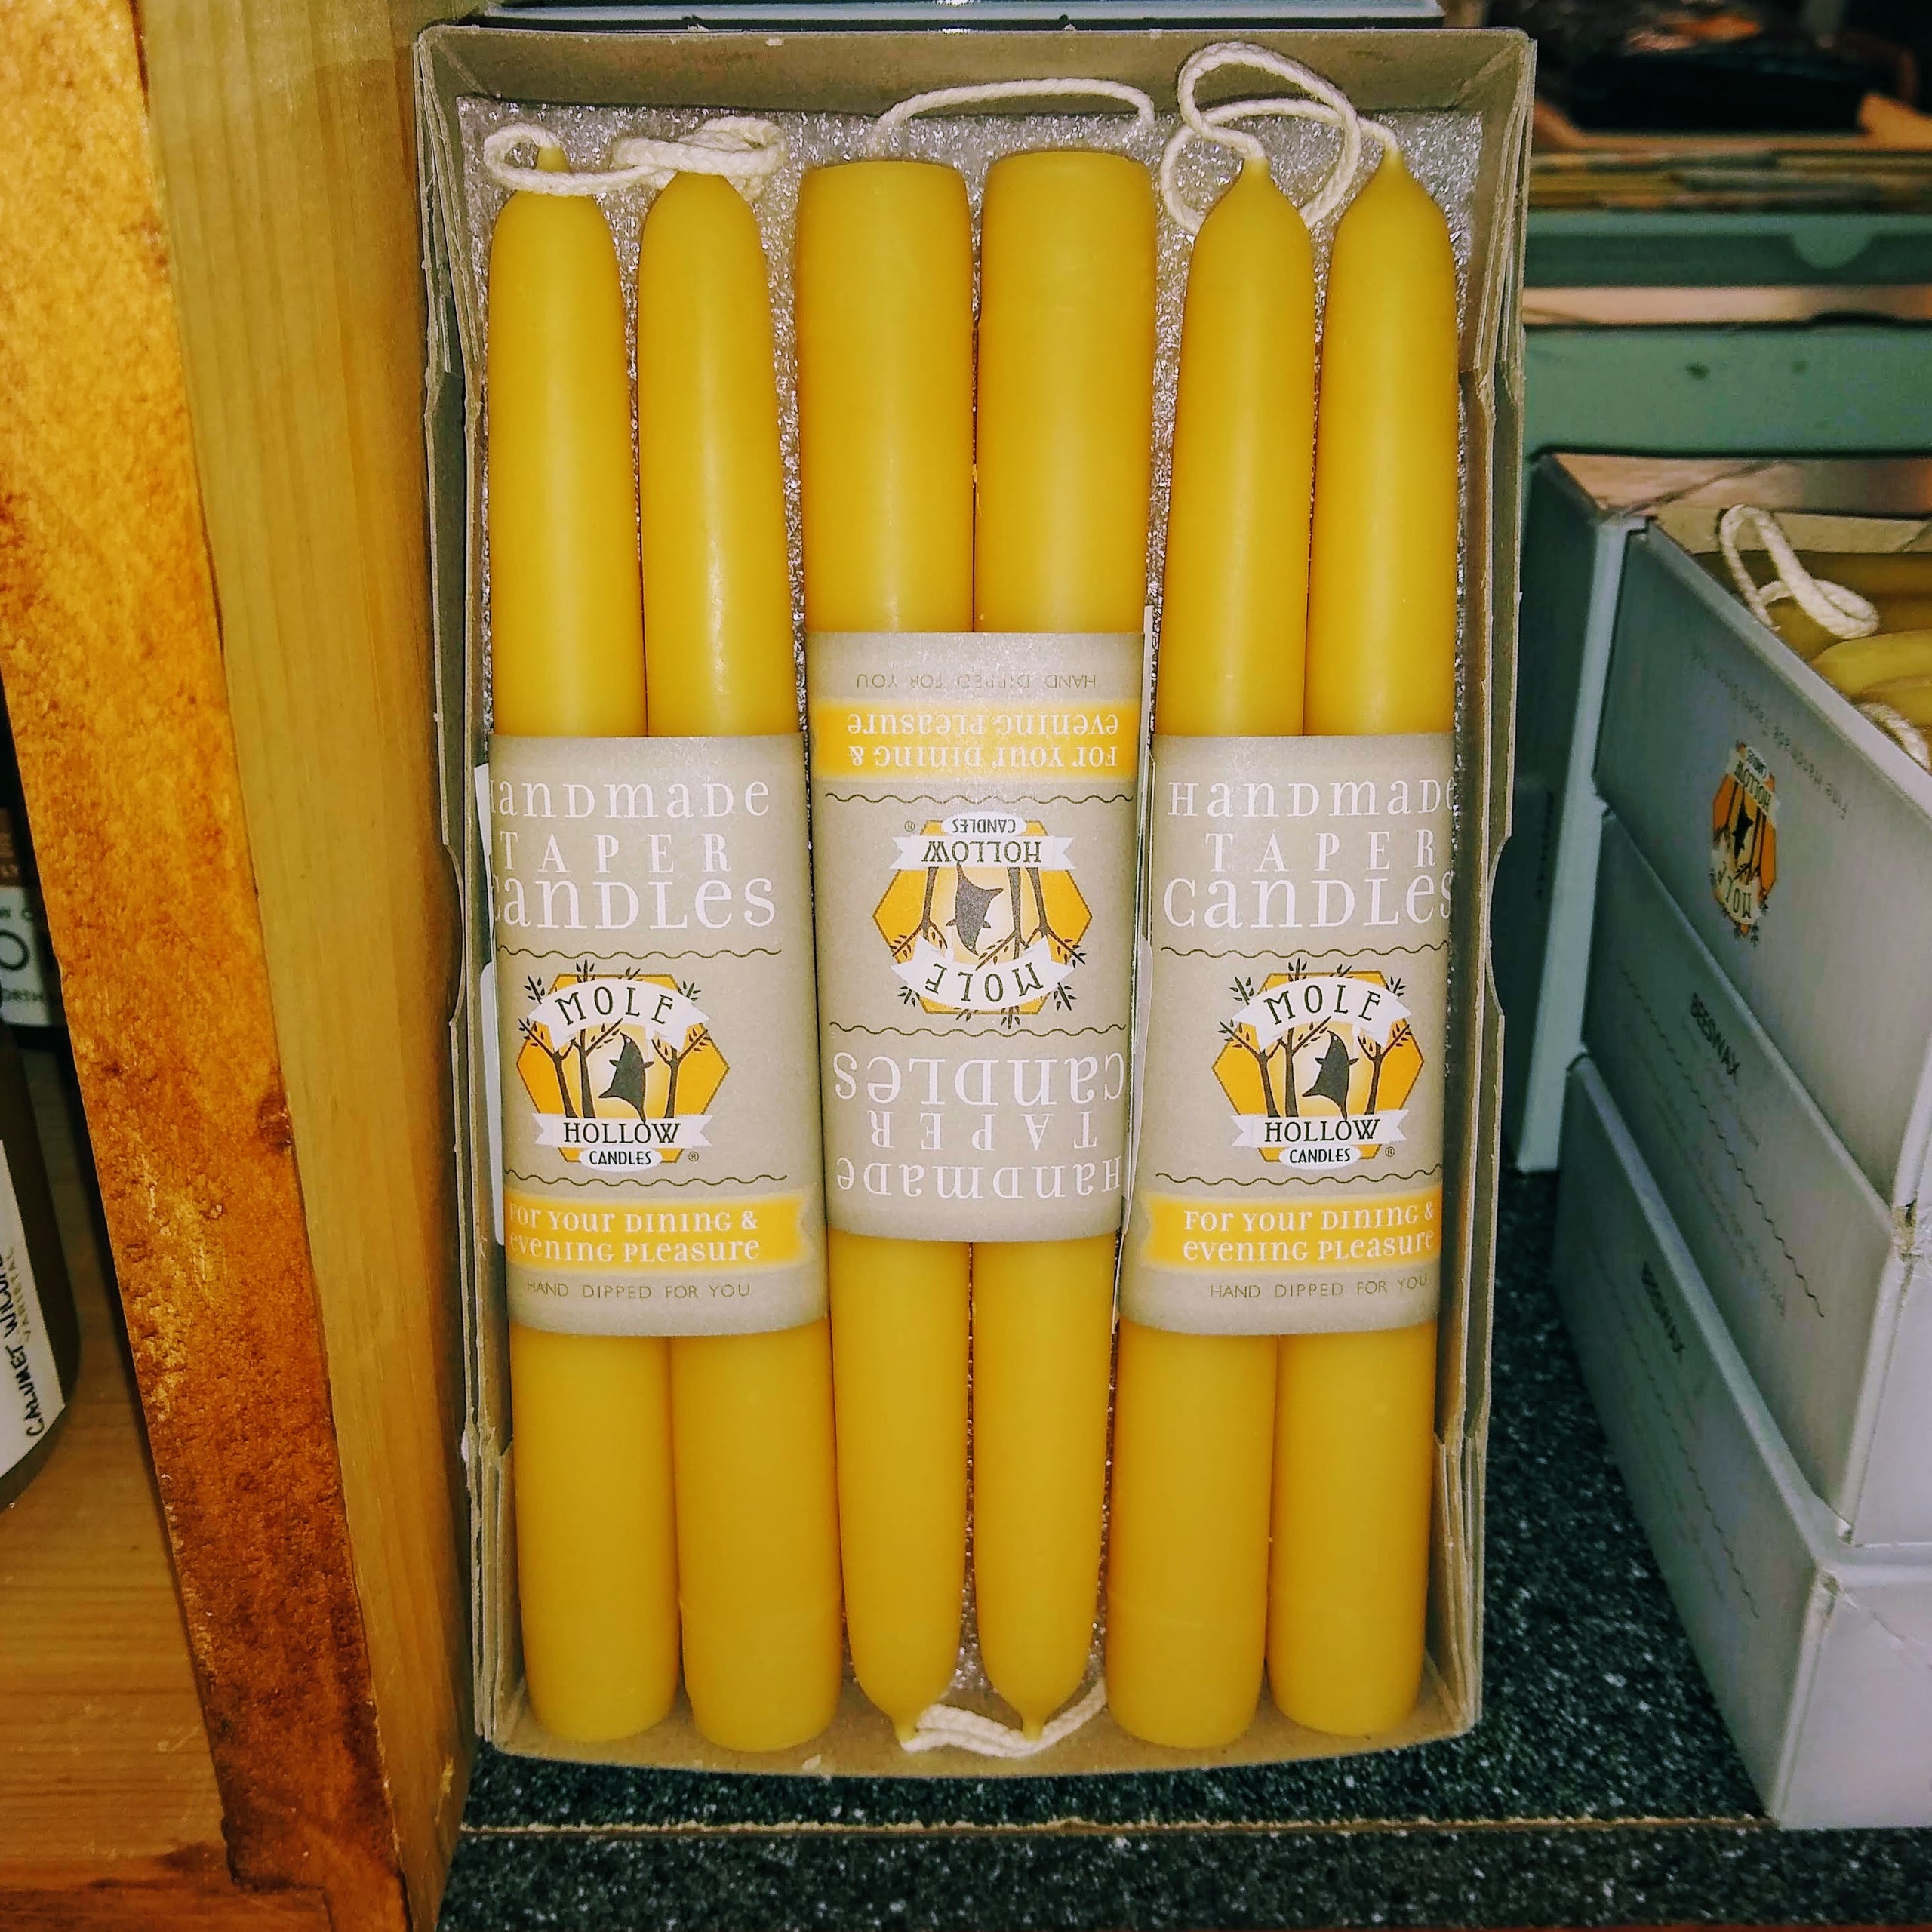 Mole Hollow 8 Inch Beeswax Candle Pair  THE HIVE: CHICAGO'S BEEKEEPING  SUPPLY STORE